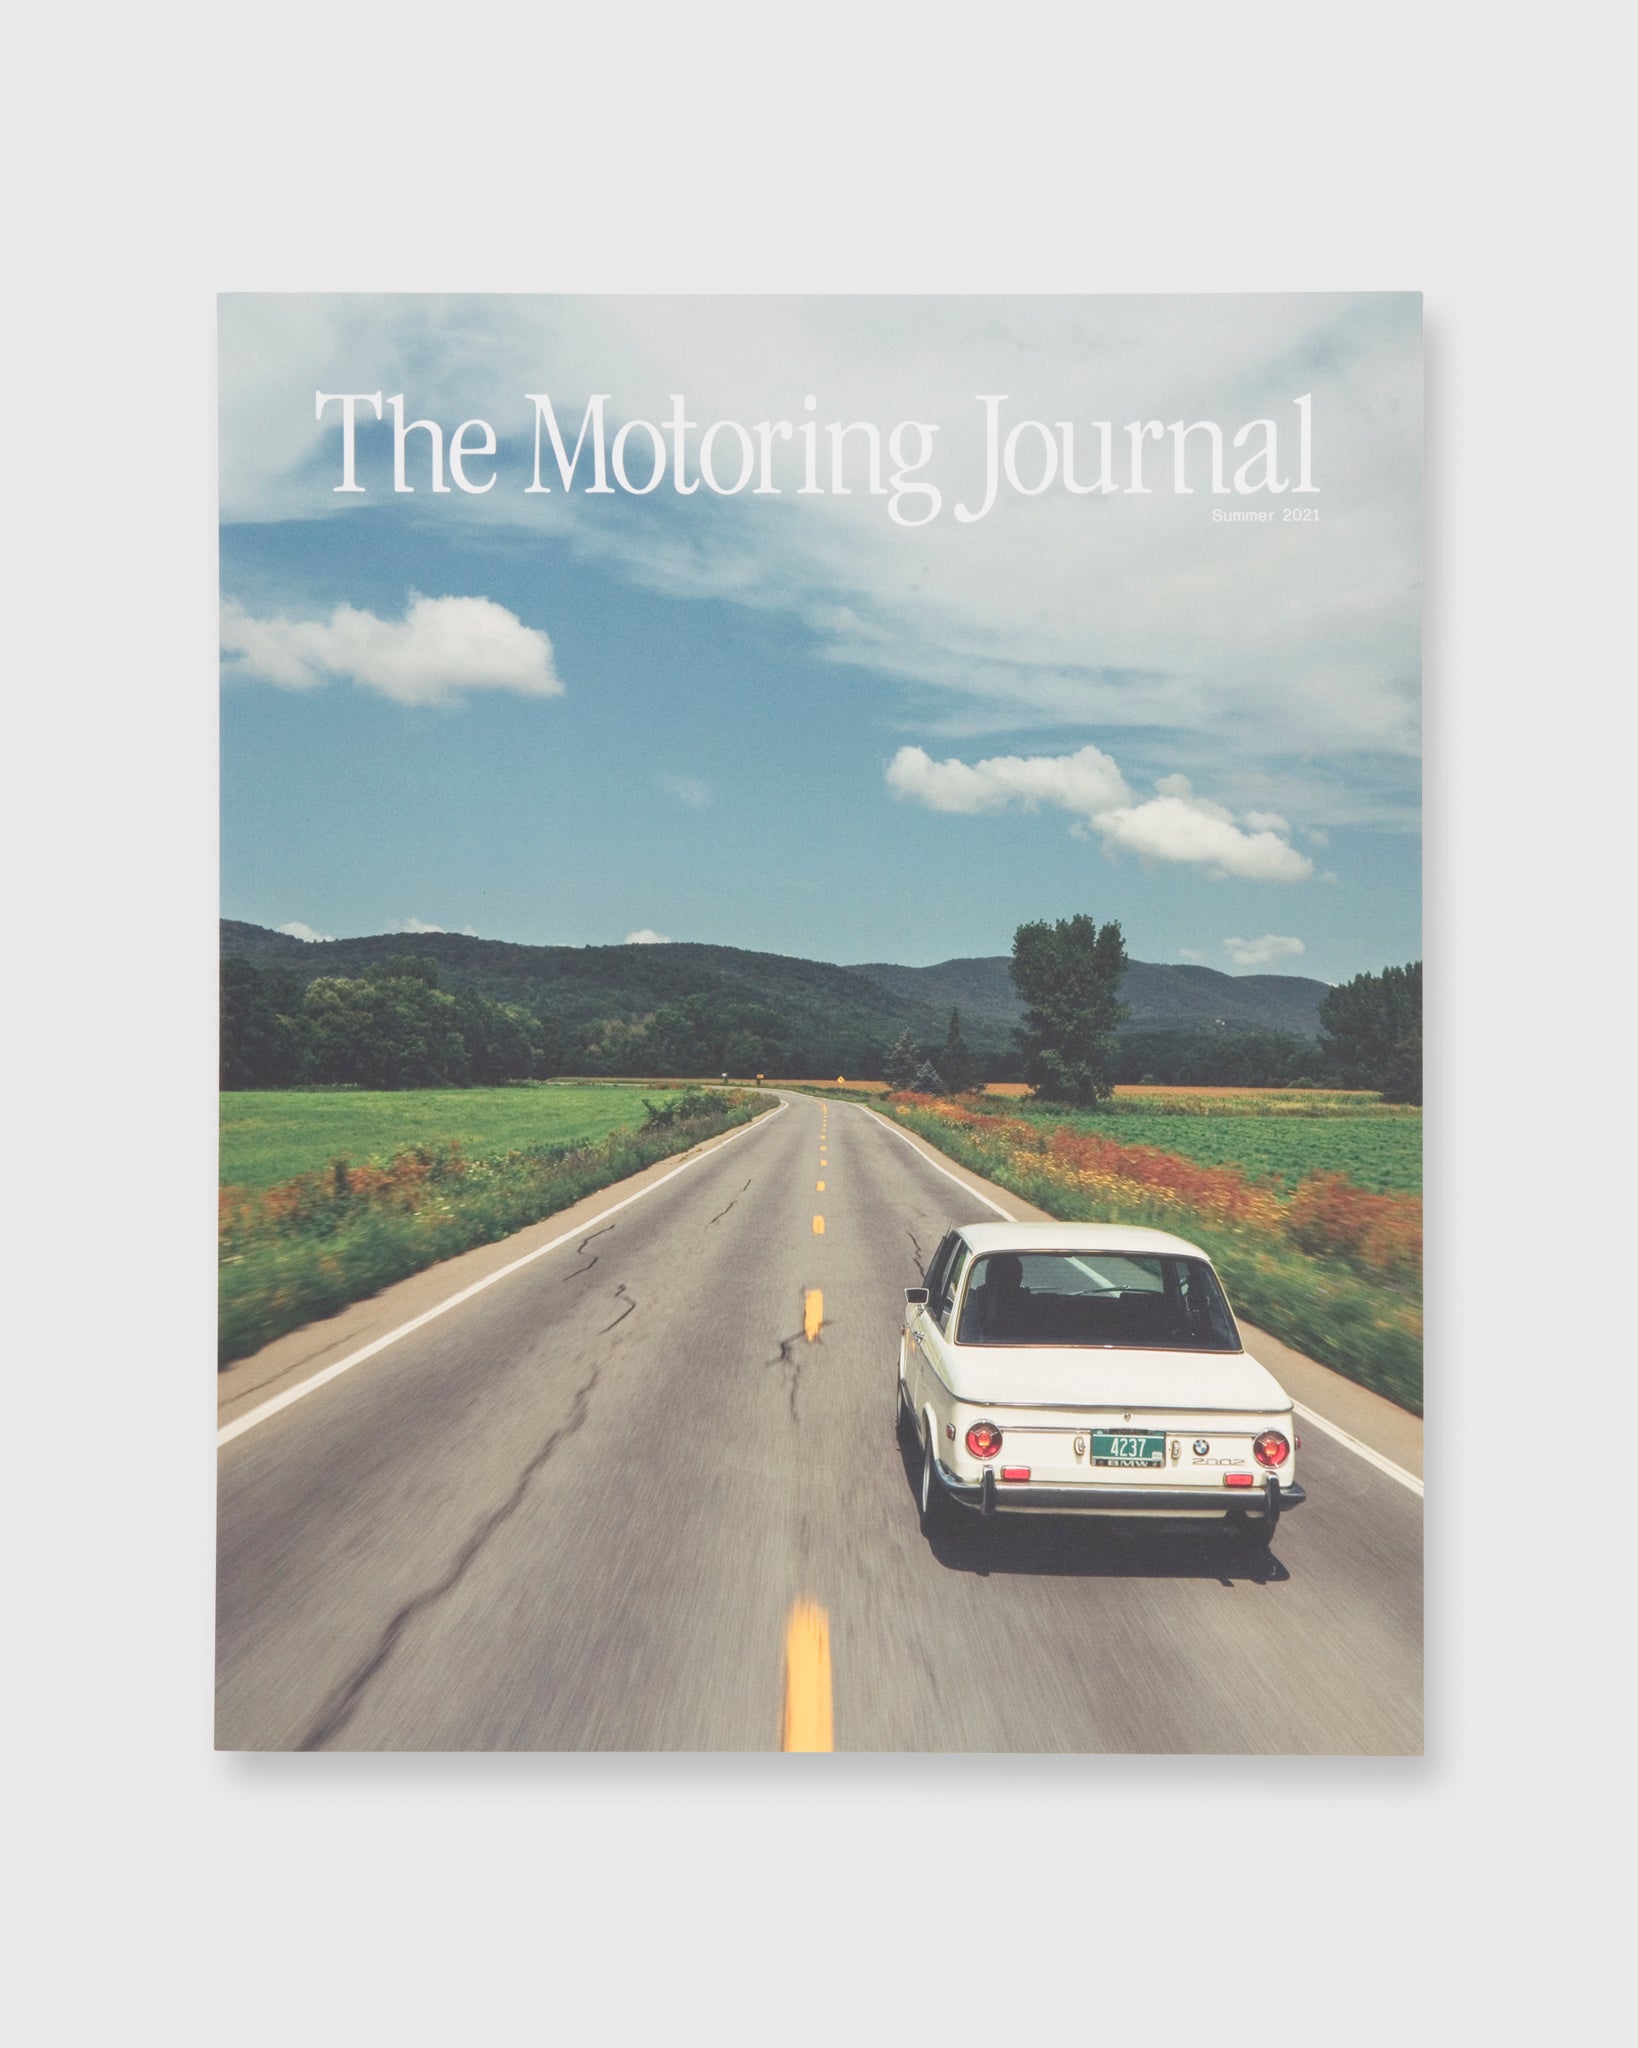 The Motoring Journal - Issue No. 3